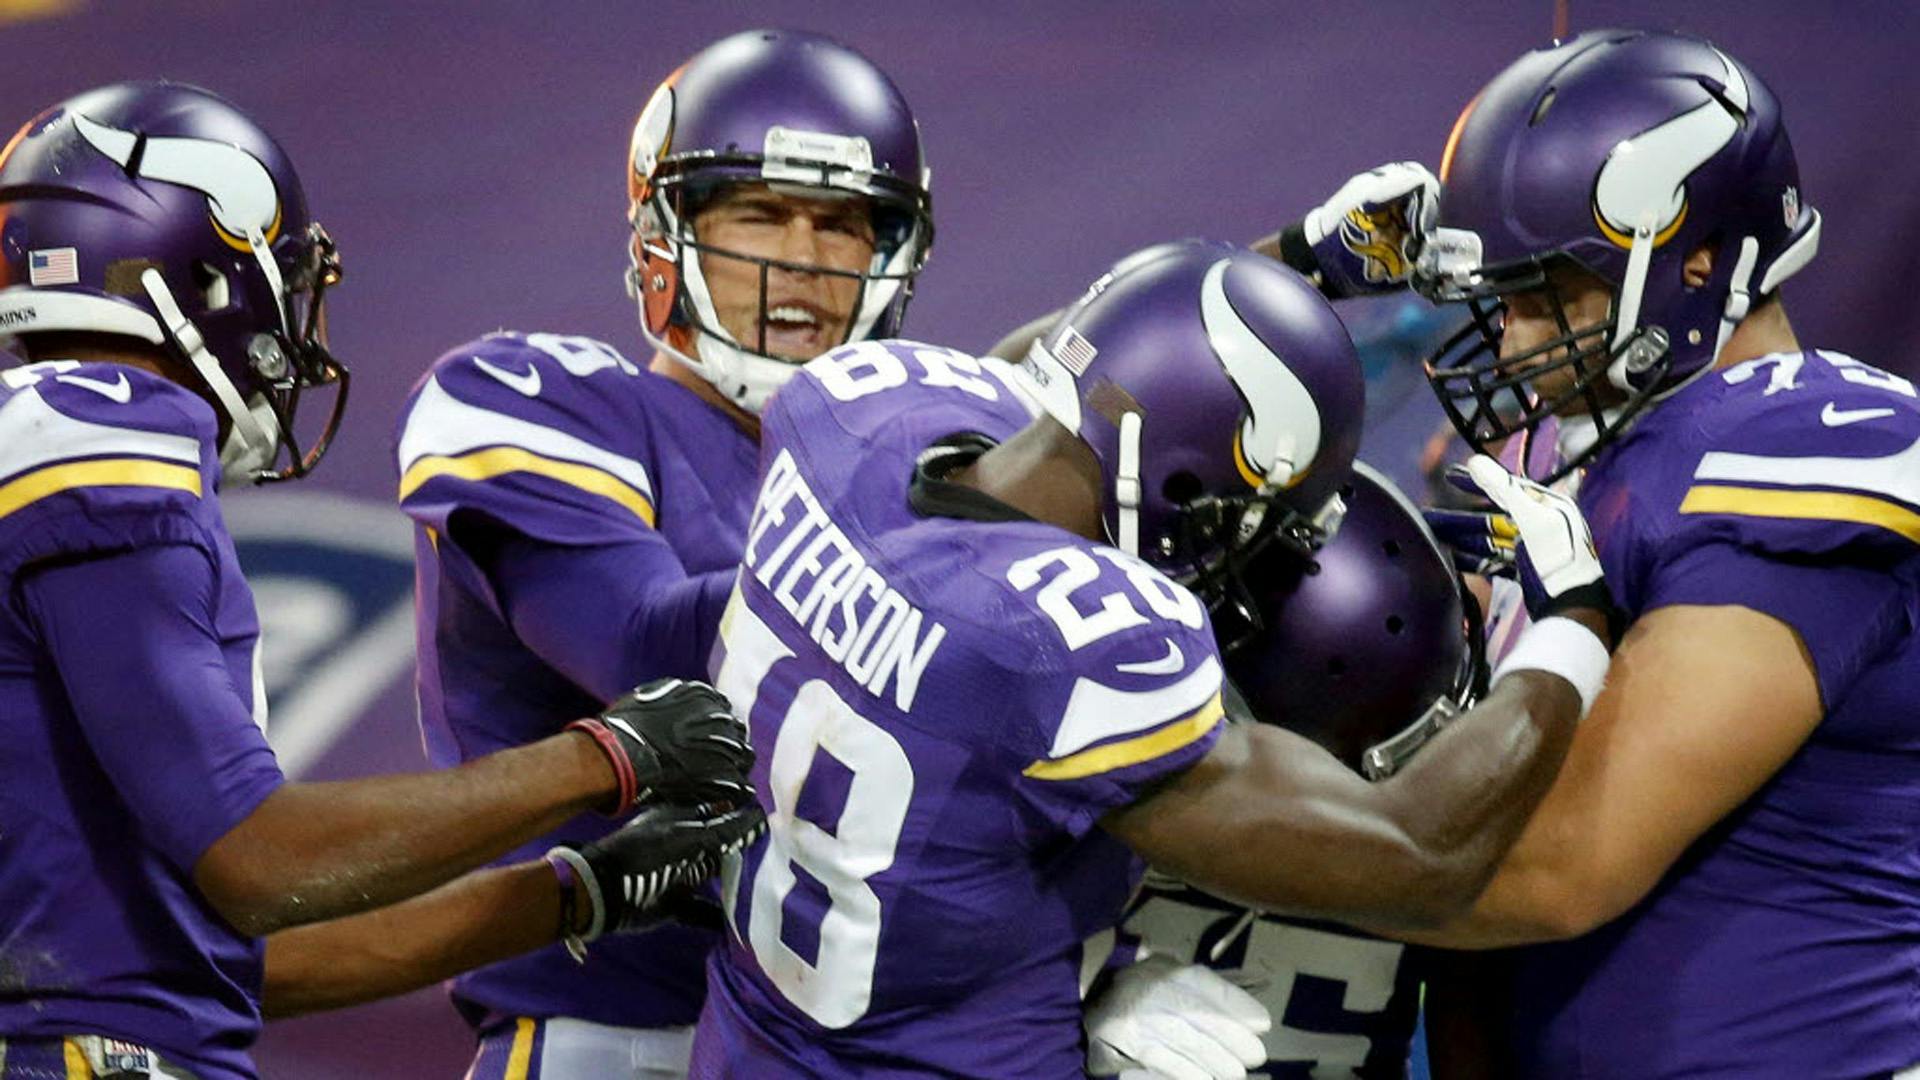 Vikings players talked about their 34-27 victory against the Pittsburg Steelers in London.